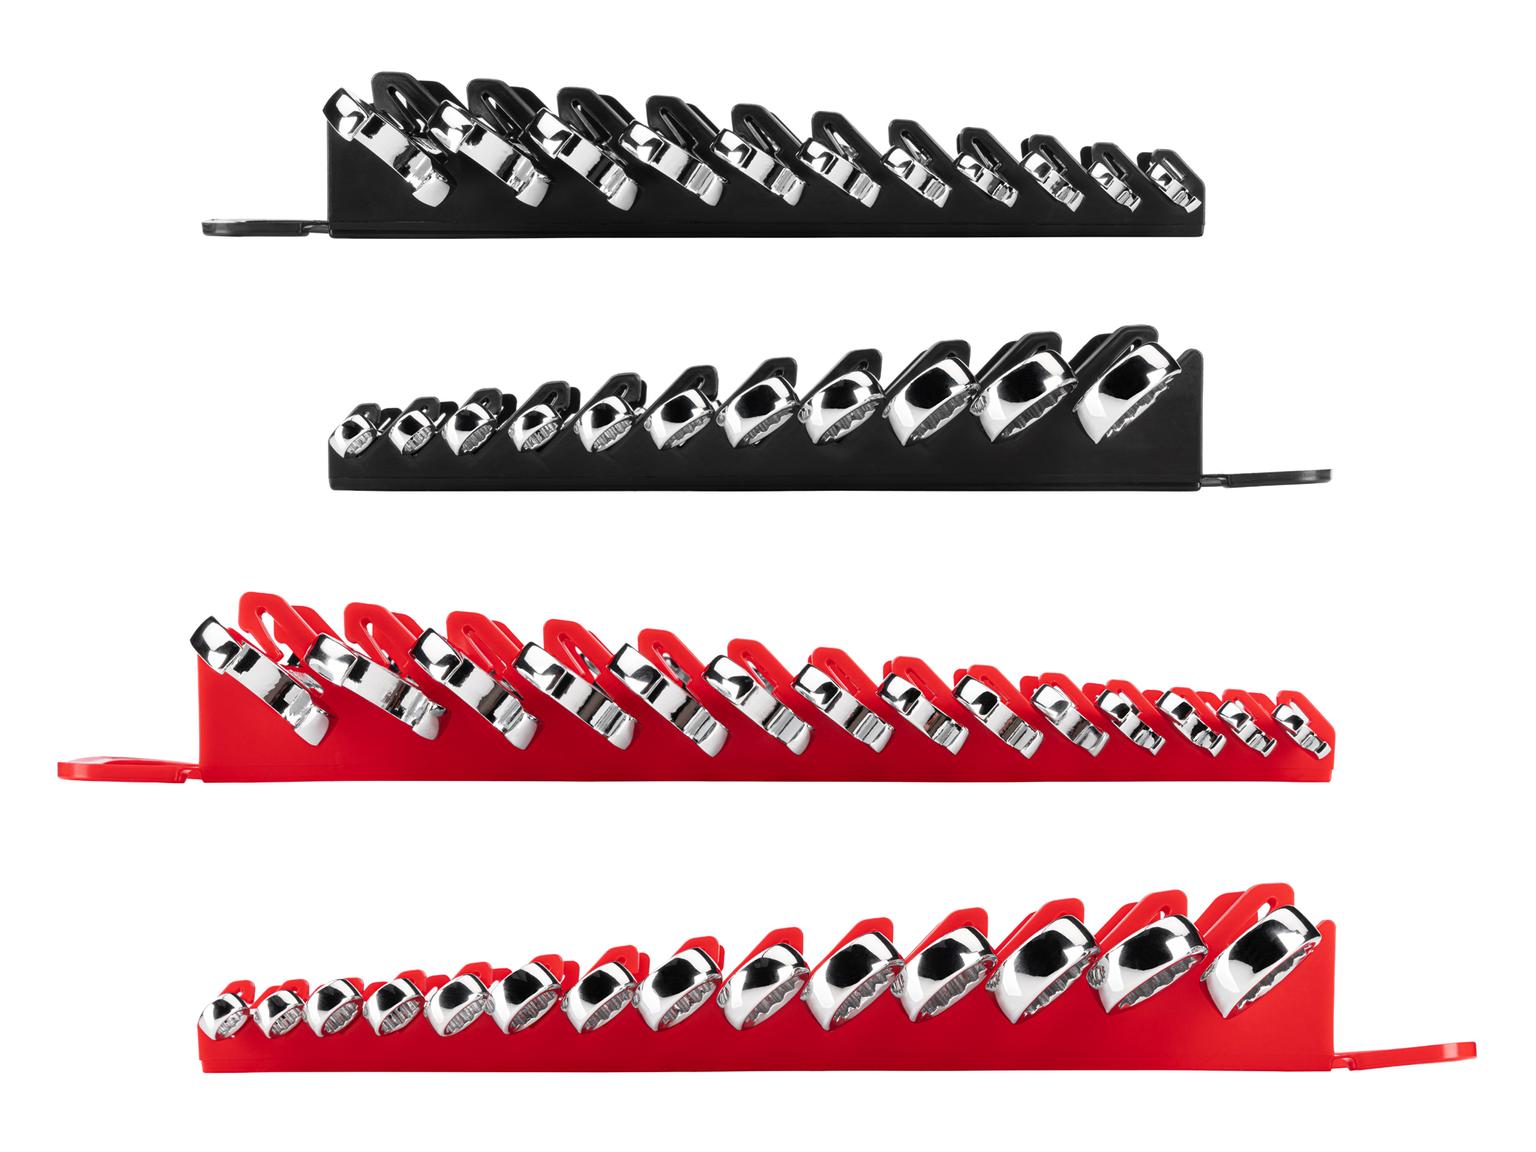 TEKTON WCB92403-T Stubby Combination Wrench Set with Holder, 25-Piece (1/4 - 3/4 in., 6 - 19 mm)